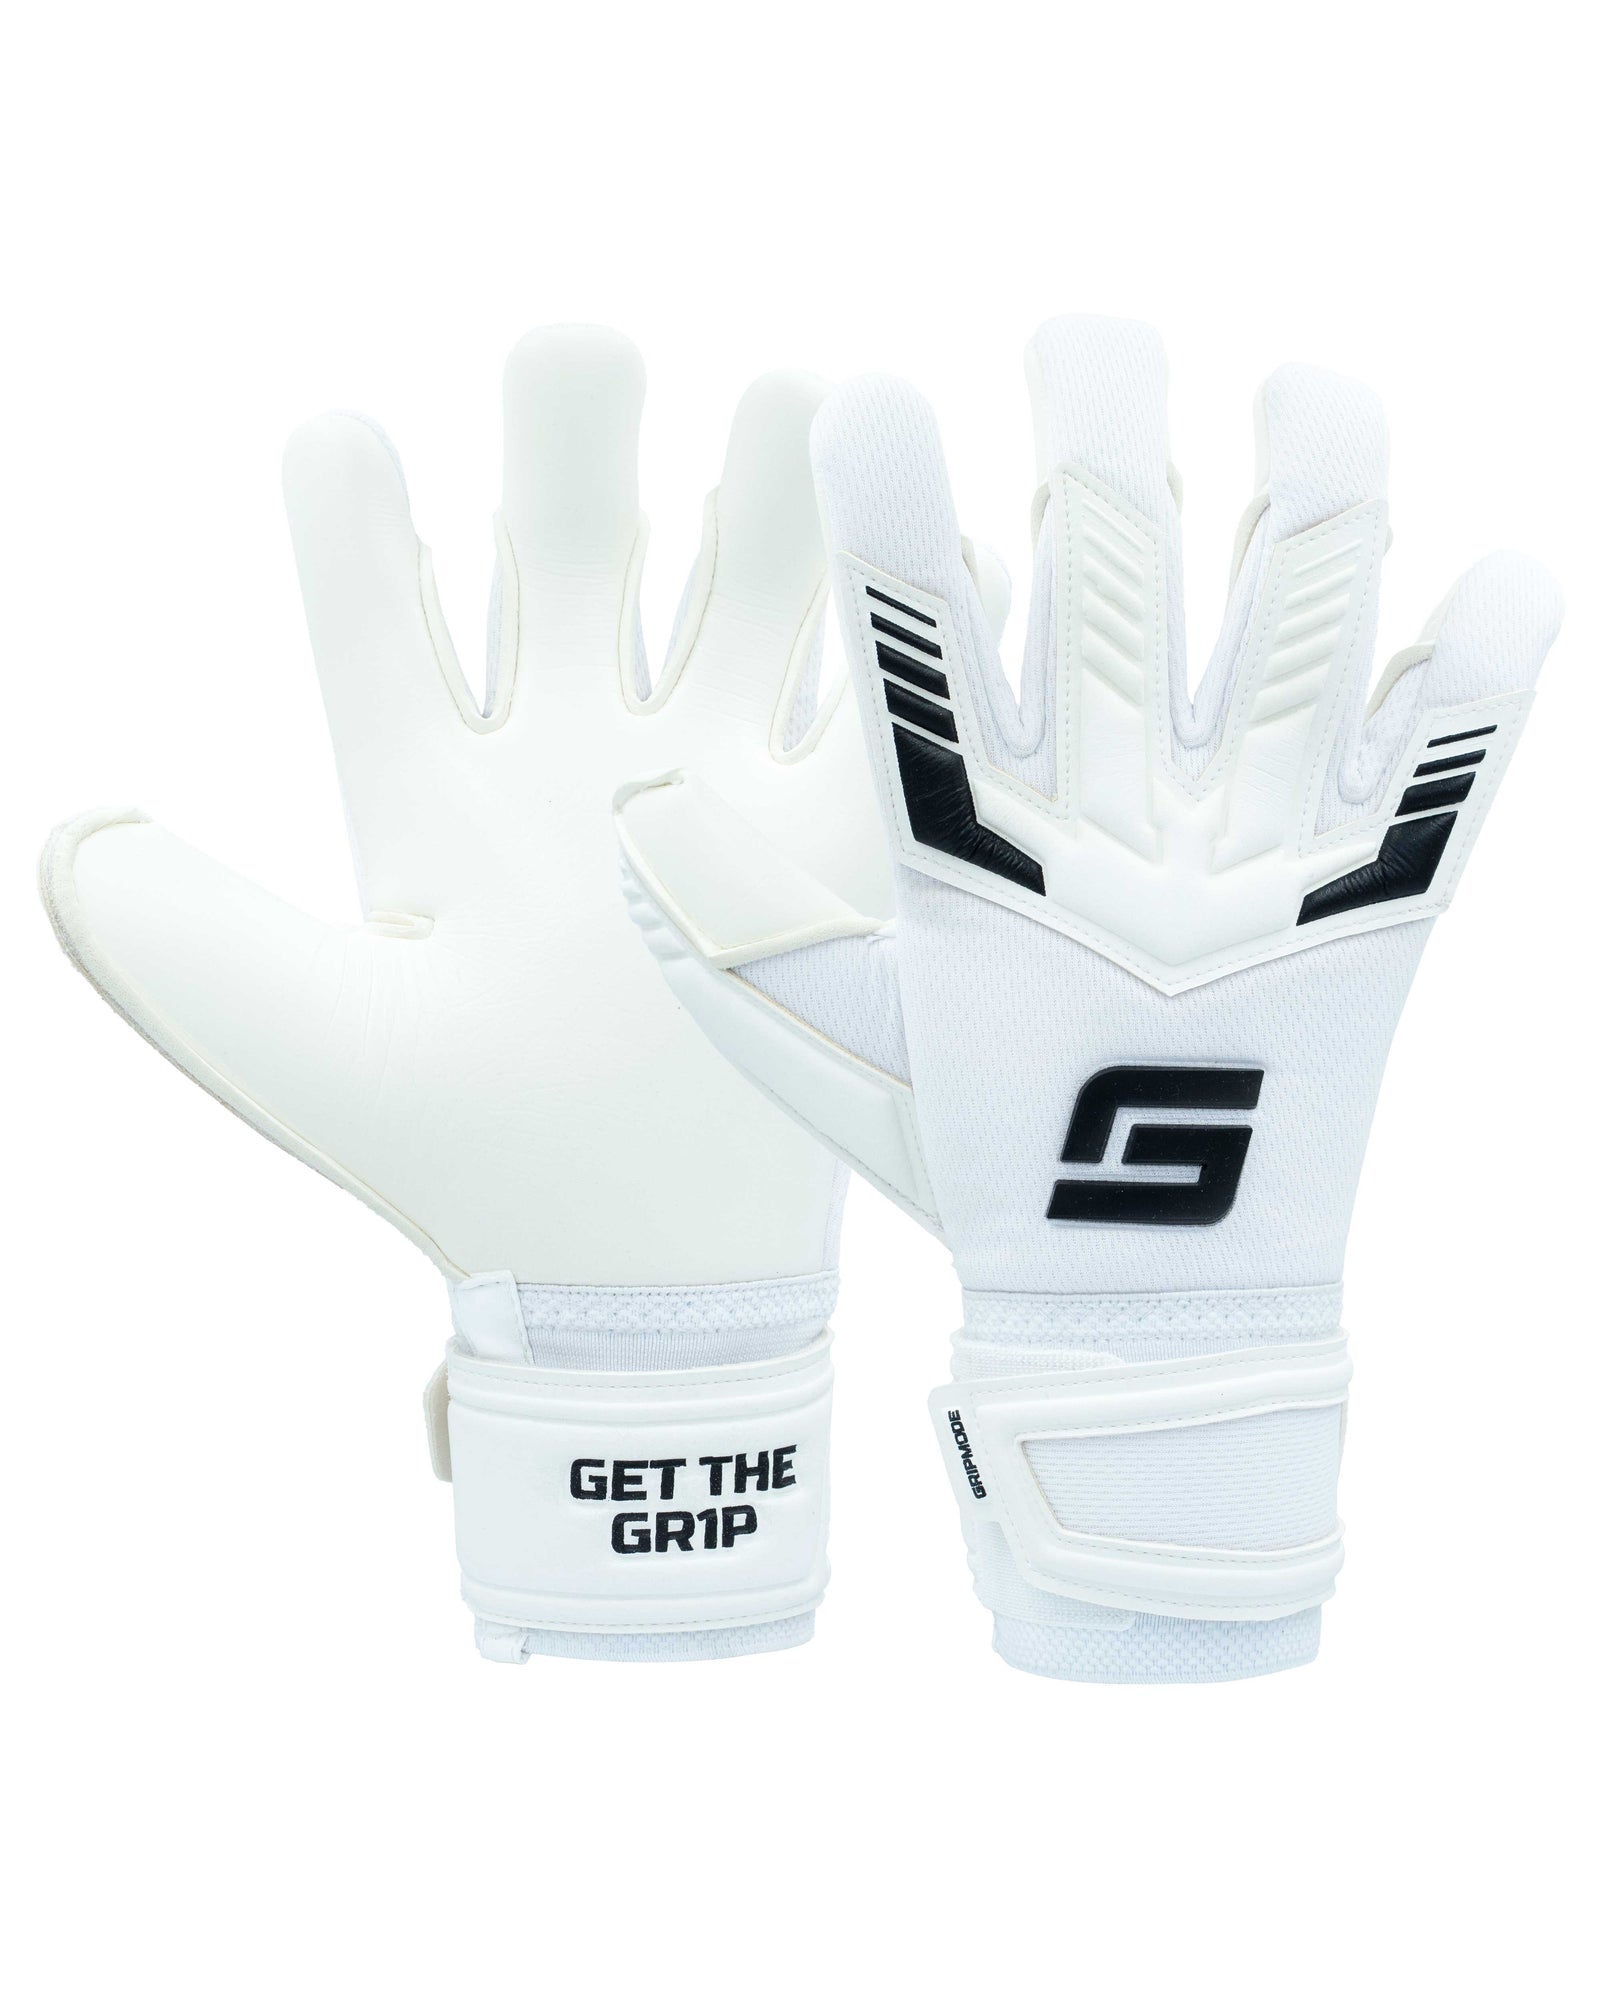 Best goalkeeper gloves 2022: Latex and mesh designs for great grip